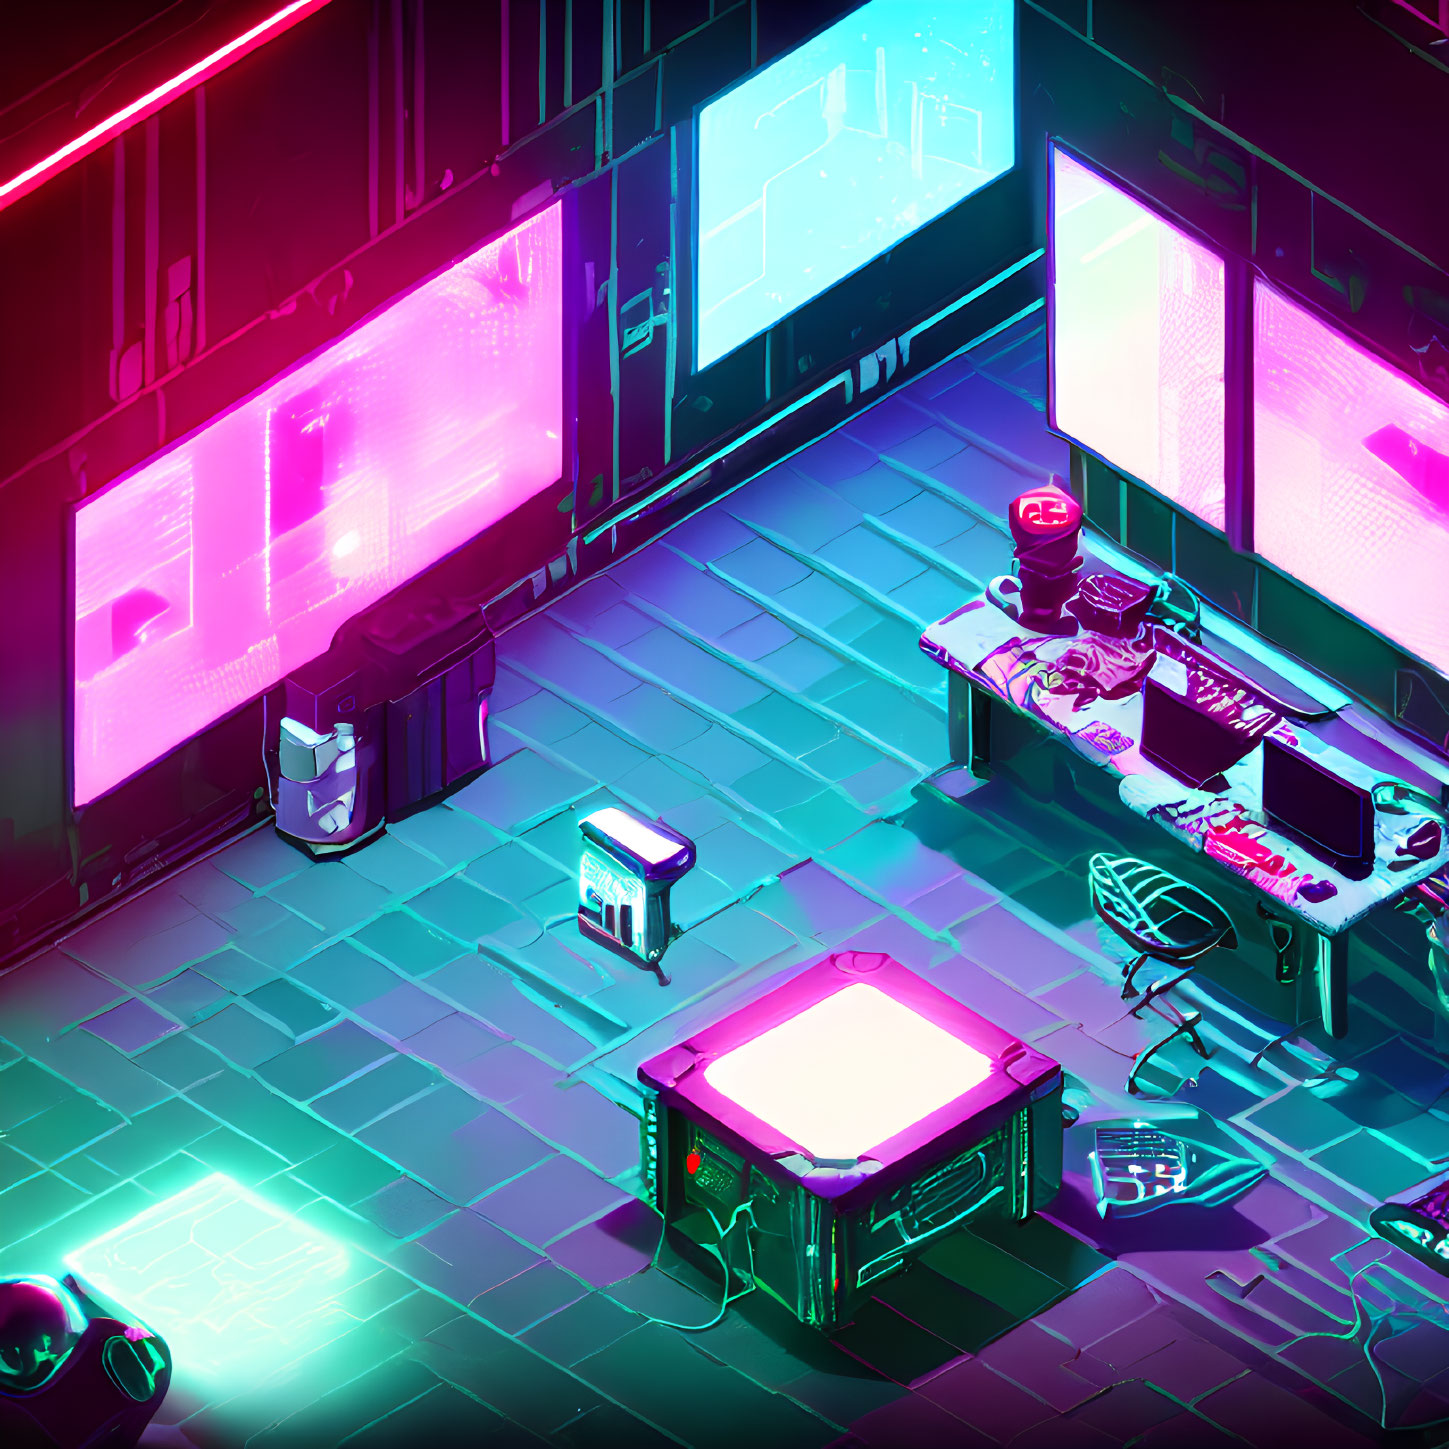 Futuristic room with neon lights, high-tech screens, illuminated table, and advanced gadgets.